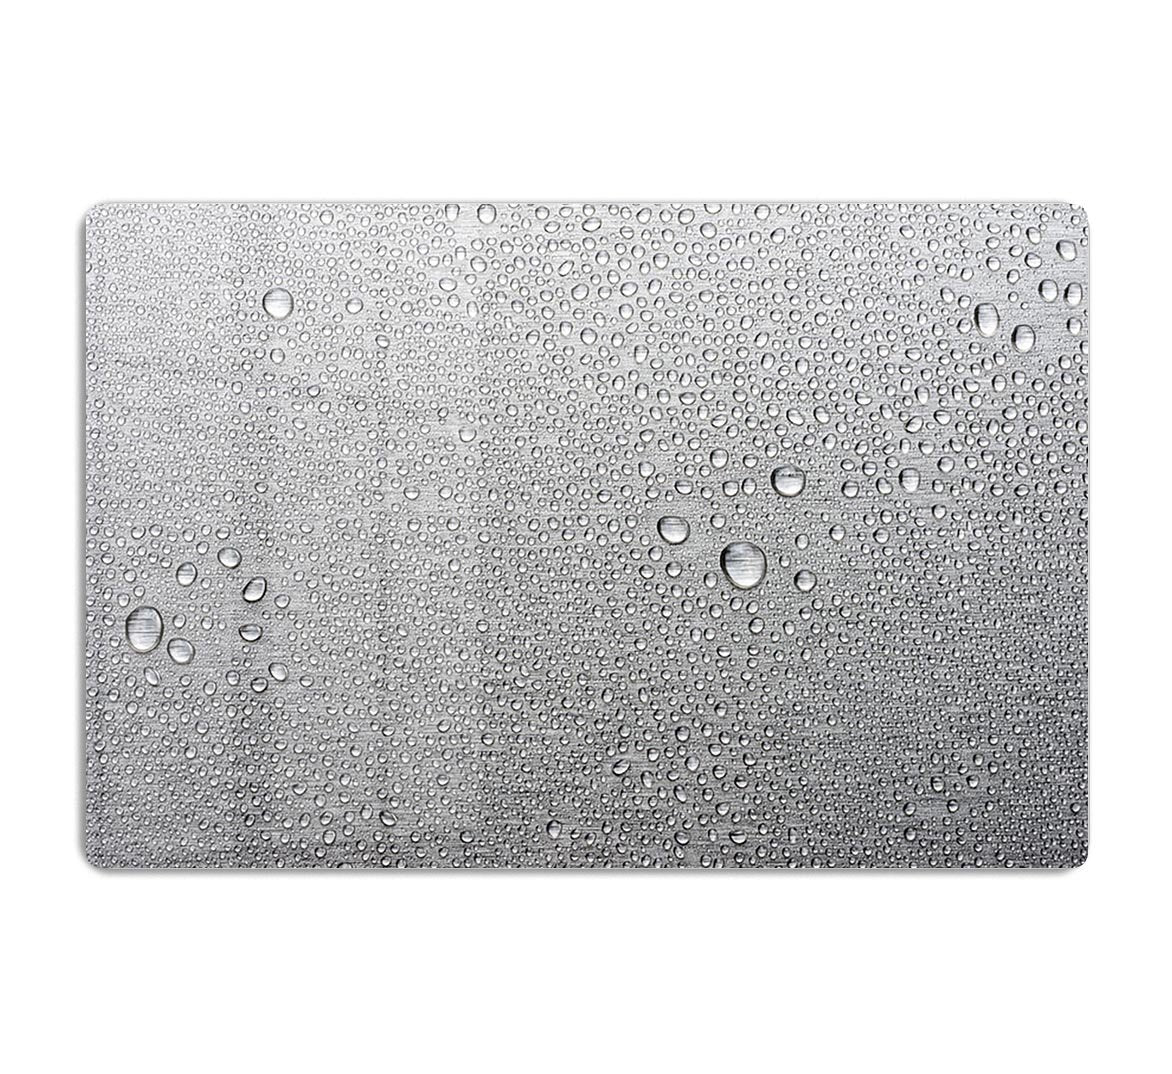 Brushed metal surface with water HD Metal Print - Canvas Art Rocks - 1